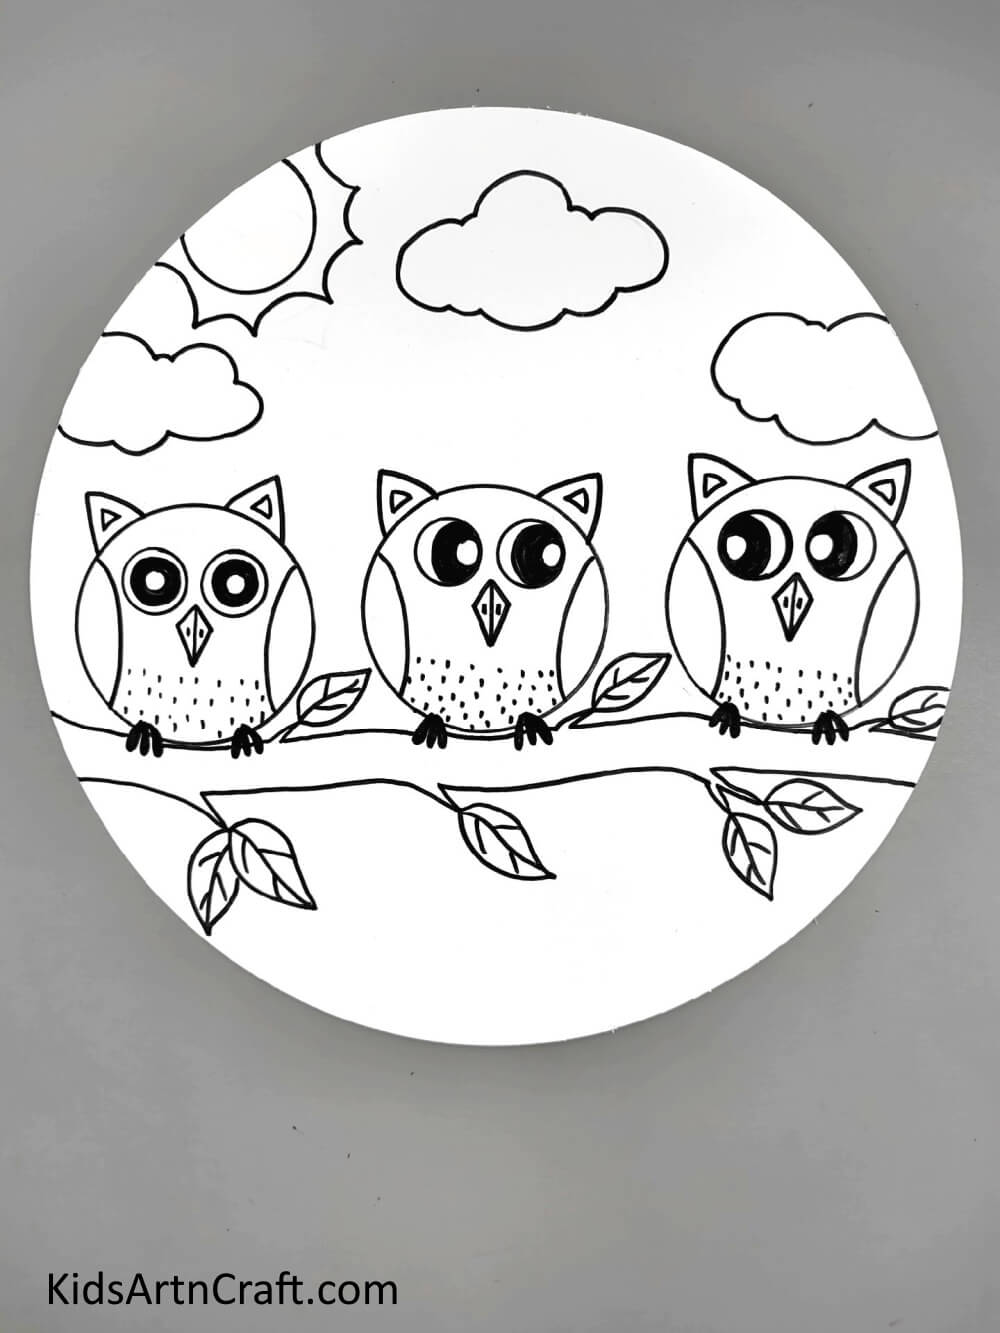 Drawing The Sun And Clouds - A walkthrough on drawing multiple owls for young learners. 